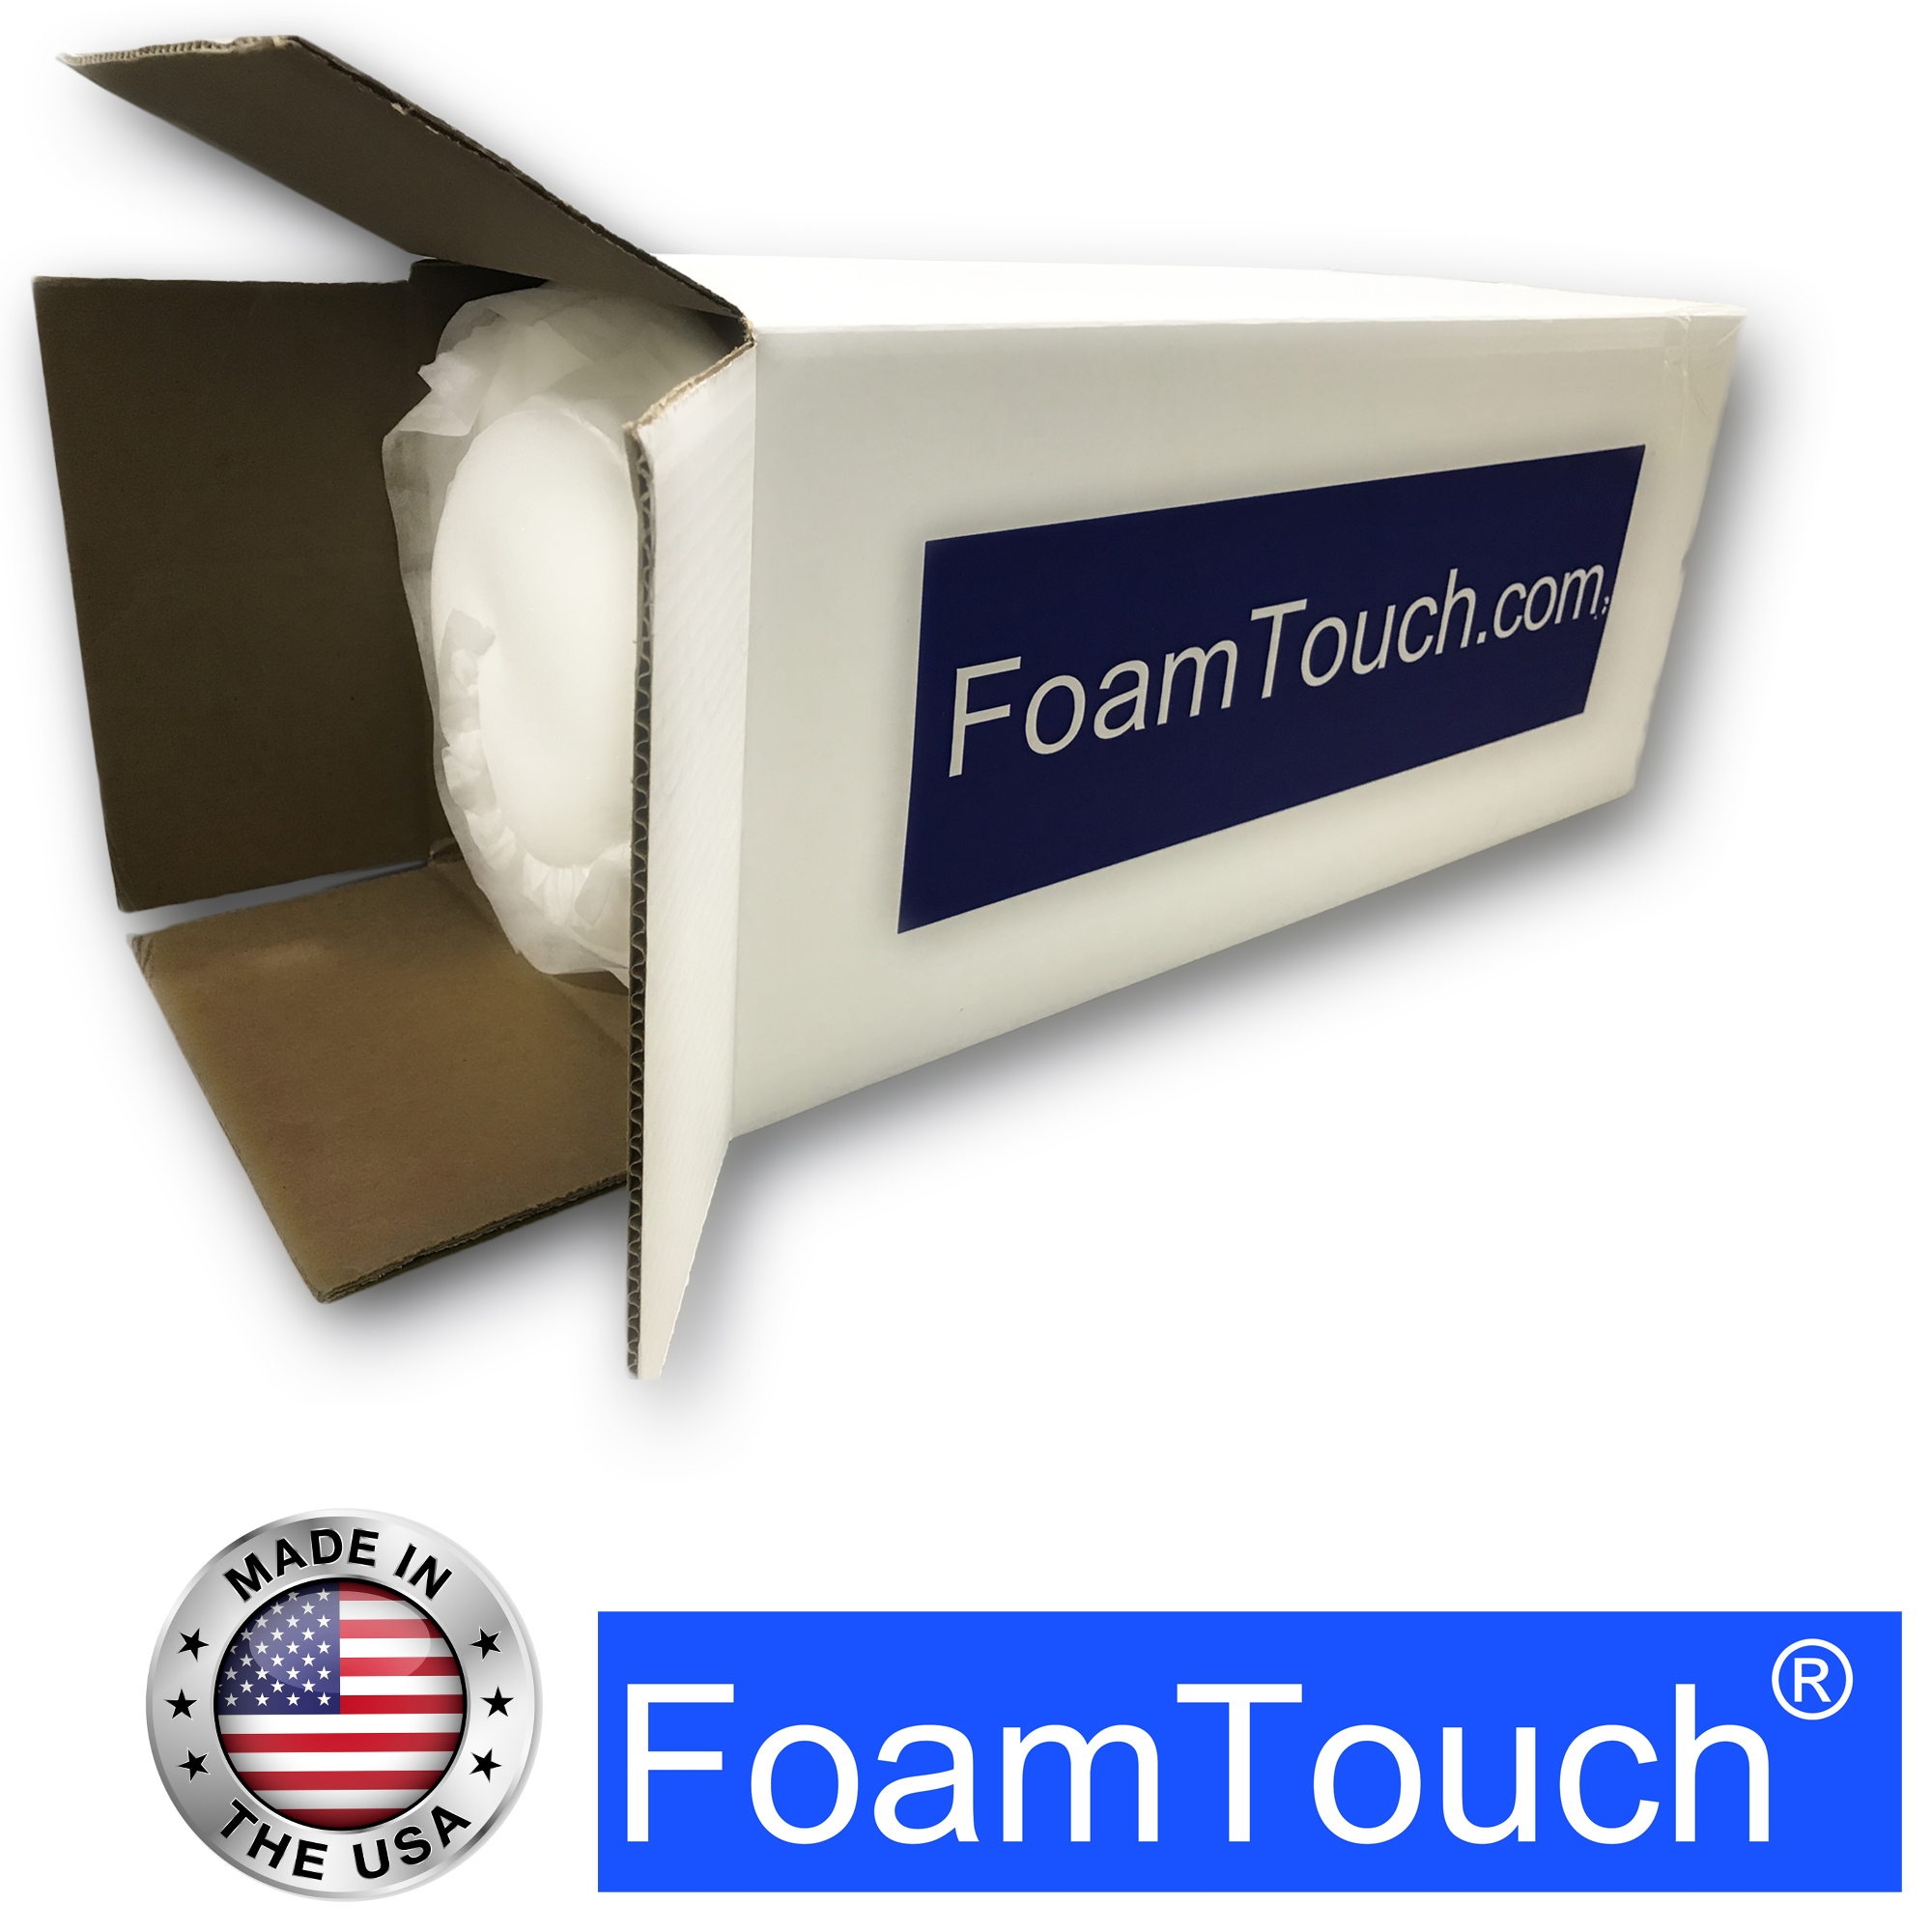 3 pack of FoamTouch High Density 1 Height x 36 Width x 72 Length Upholstery  Foam Cushion Replacement 